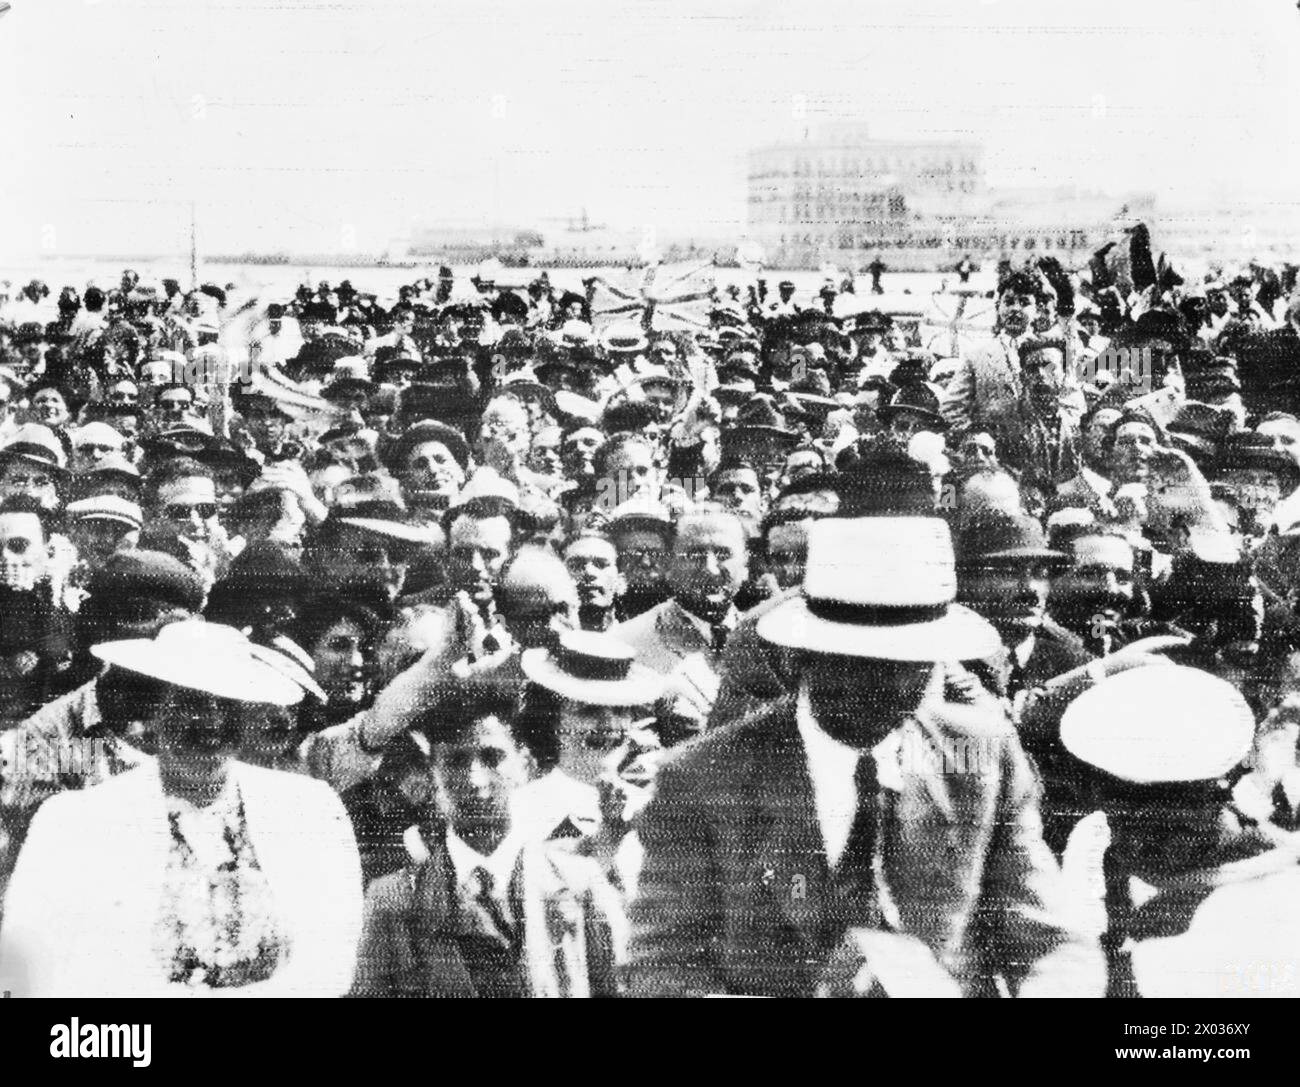 REAR ADMIRAL SIR HENRY HARWOOD RECEIVED IN MONTEVIDEO. 3 JANUARY 1940, MONTEVIDEO, URUGUAY. ADMIRAL HARWOOD ARRIVED IN THE CRUISER HMS AJAX AFTER THE BATTLE OF THE RIVER PLATE AND THE SCUTTLING OF THE GERMAN BATTLESHIP ADMIRALE GRAF SPEE. (RADIO PHOTOGRAPH?) - Crowds at Montevideo that turned out to greet the AJAX upon her arrival Stock Photo